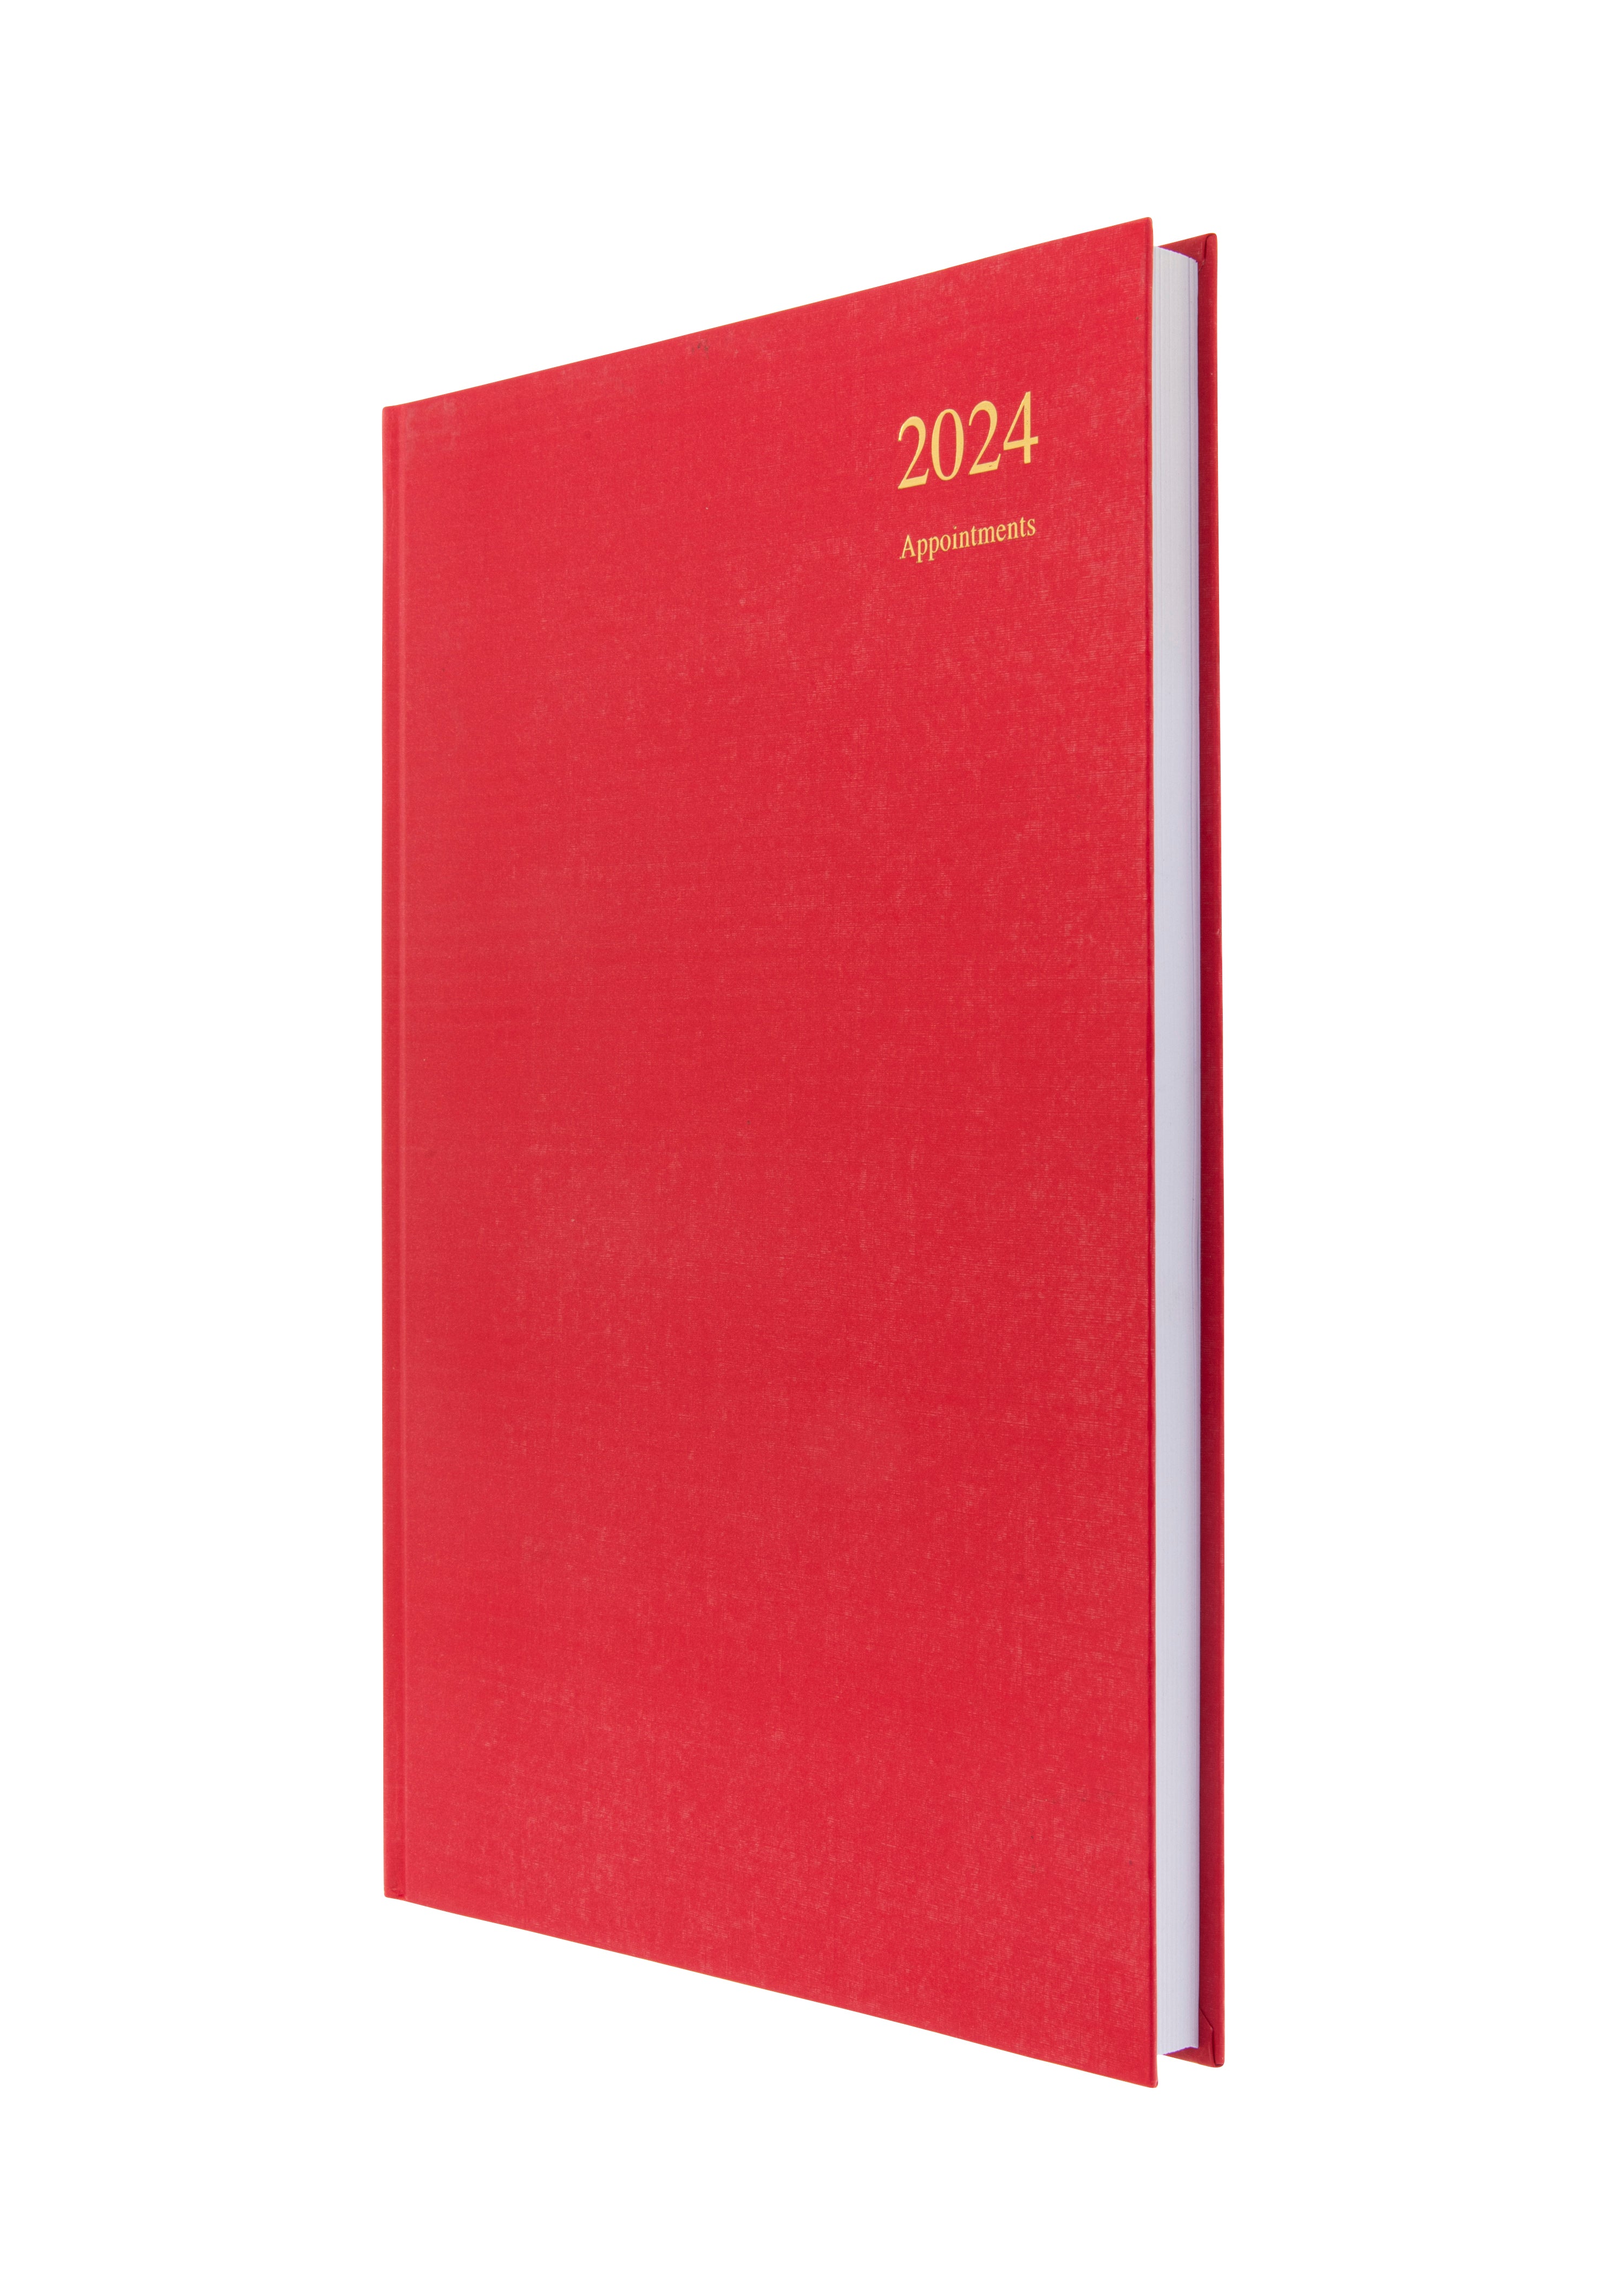 Collins Eco Friendly Essential - 2024 Daily Planner - A4 Day-to